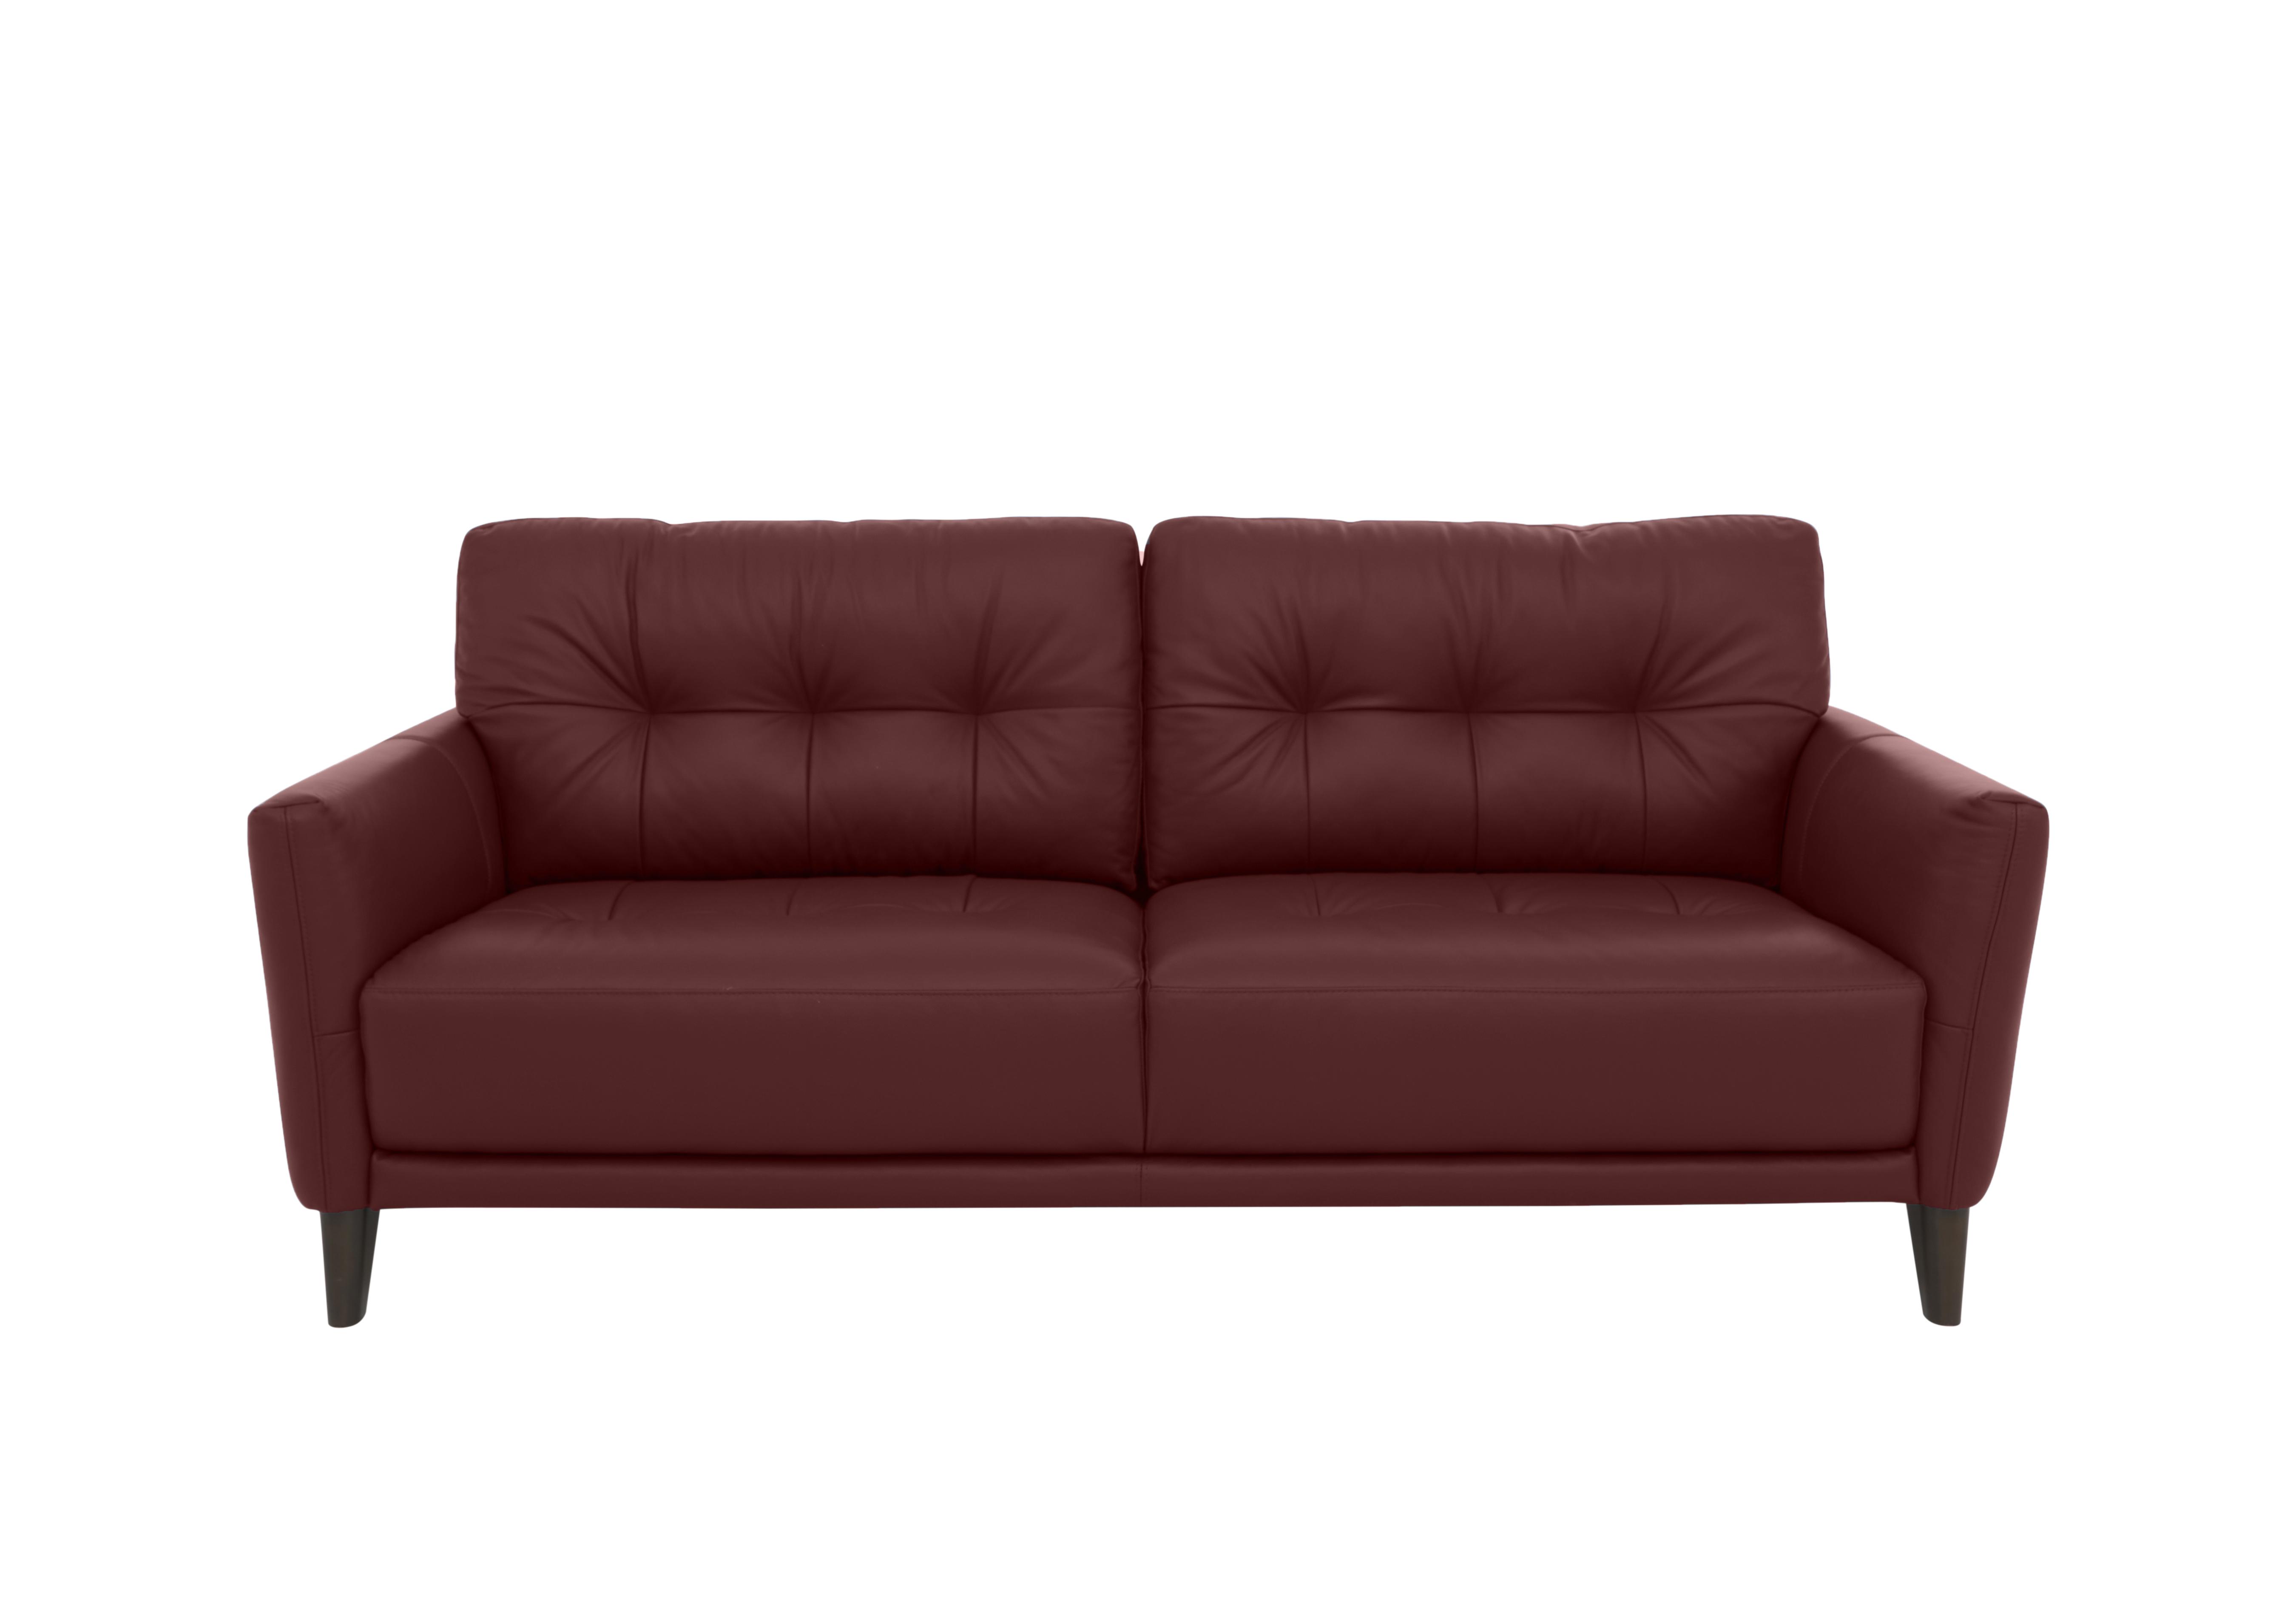 Uno Leather 3 Seater Sofa in Bv-035c Deep Red on Furniture Village